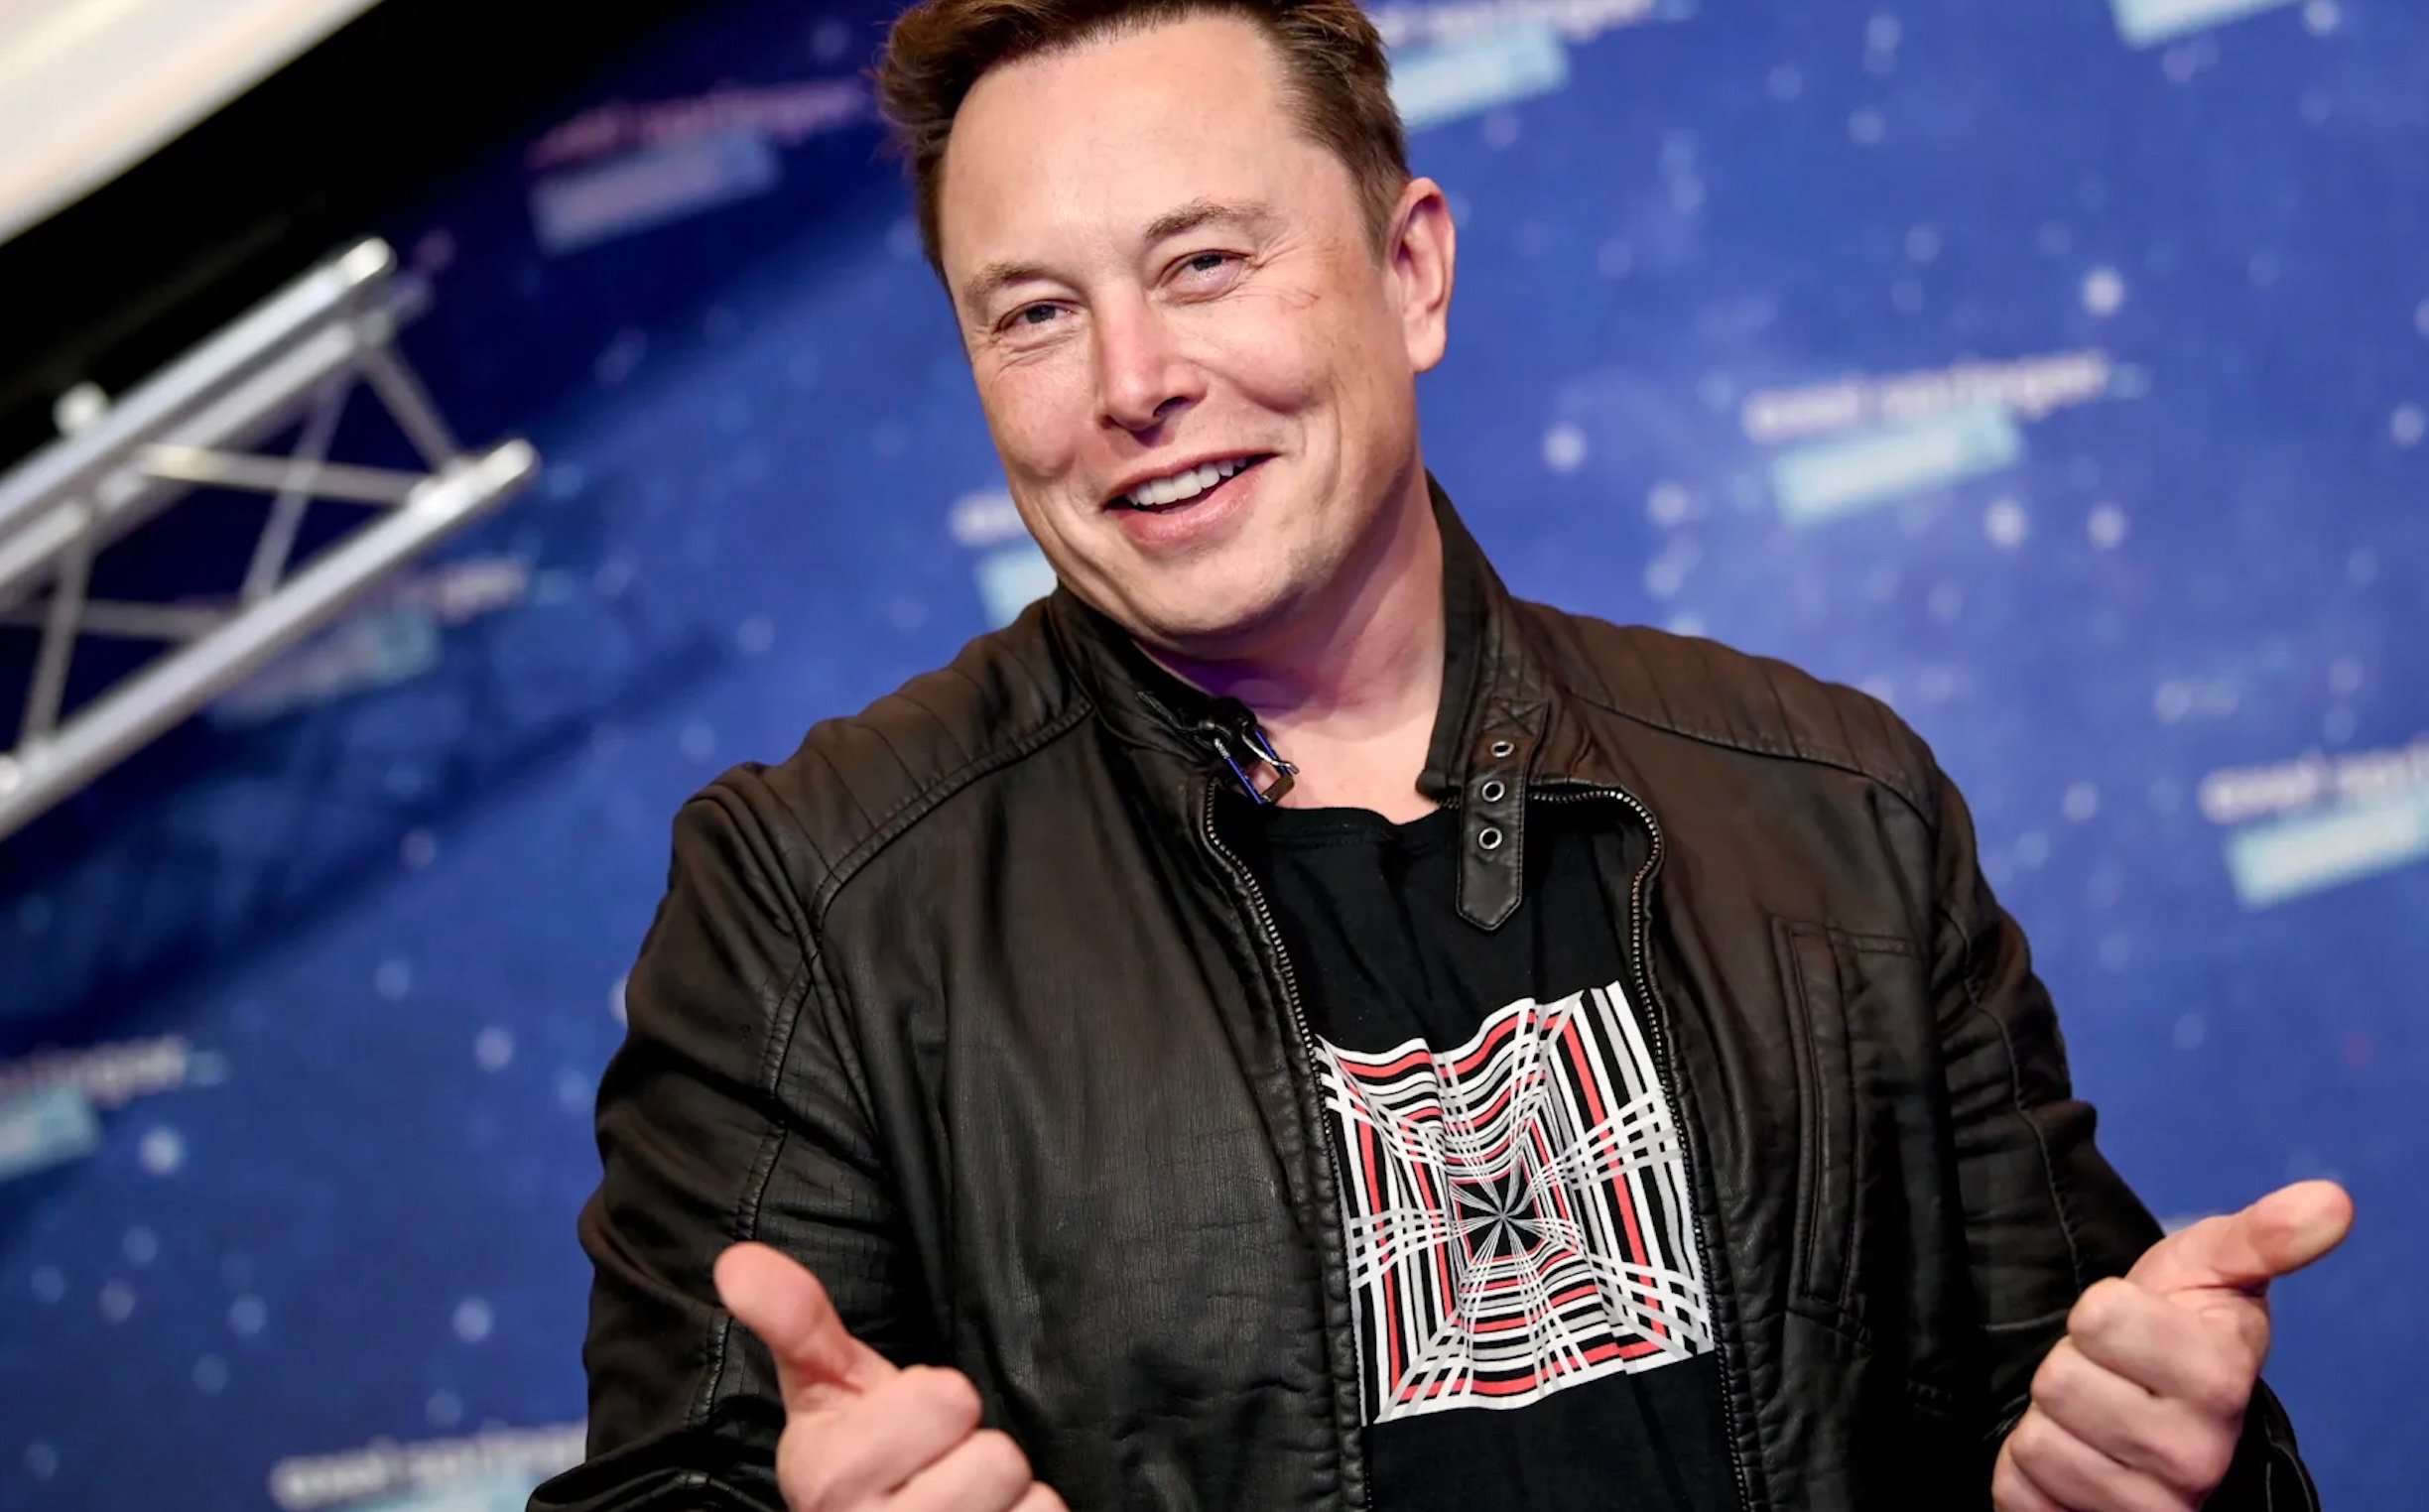  “If I Die Under Mysterious Circumstances, It’s Been Nice Knowing Ya” – Elon Musk Posts Response After Russia Threatens Starlink Founder for Assisting Ukraine